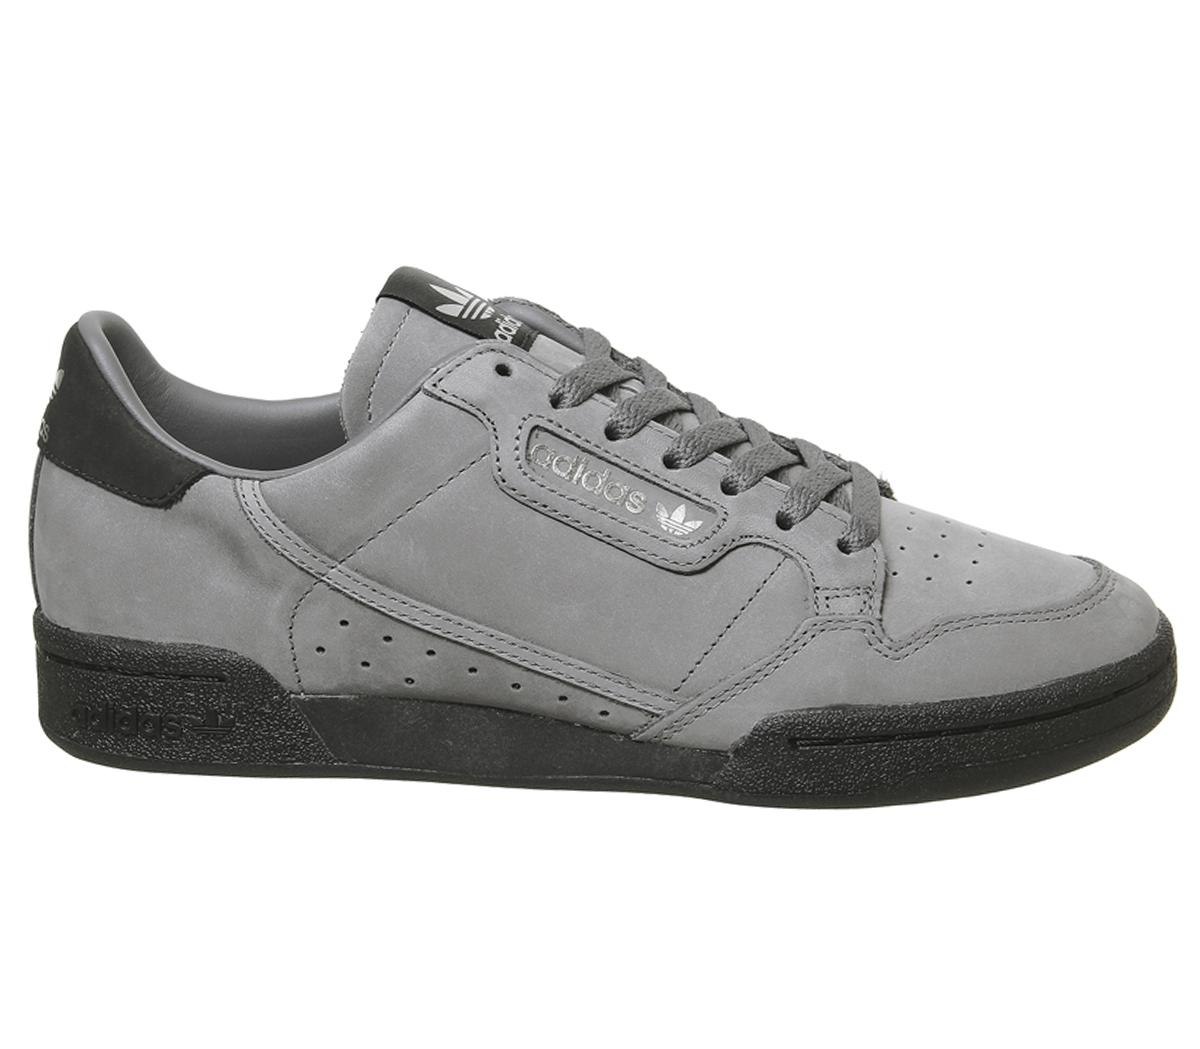 continental 80s trainers grey four grey four core black